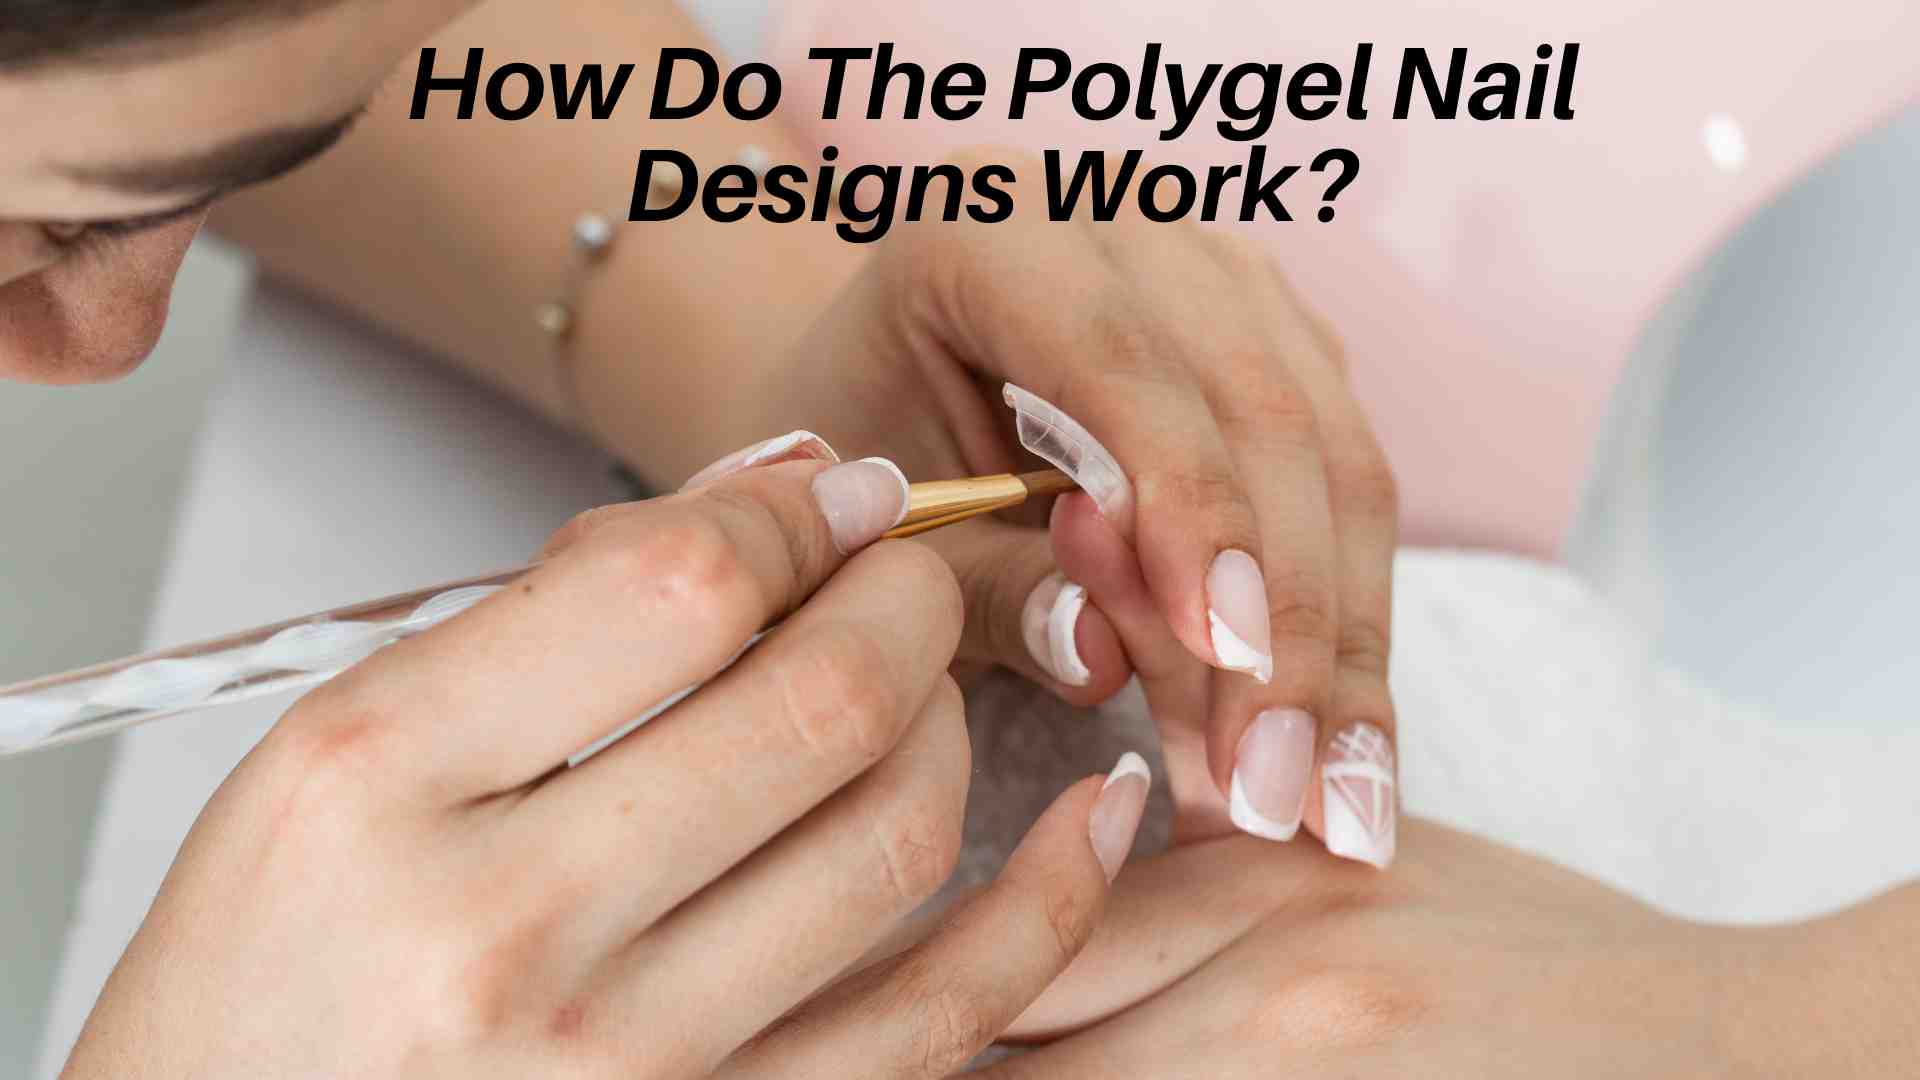 How Do The Polygel Nail Designs Work?